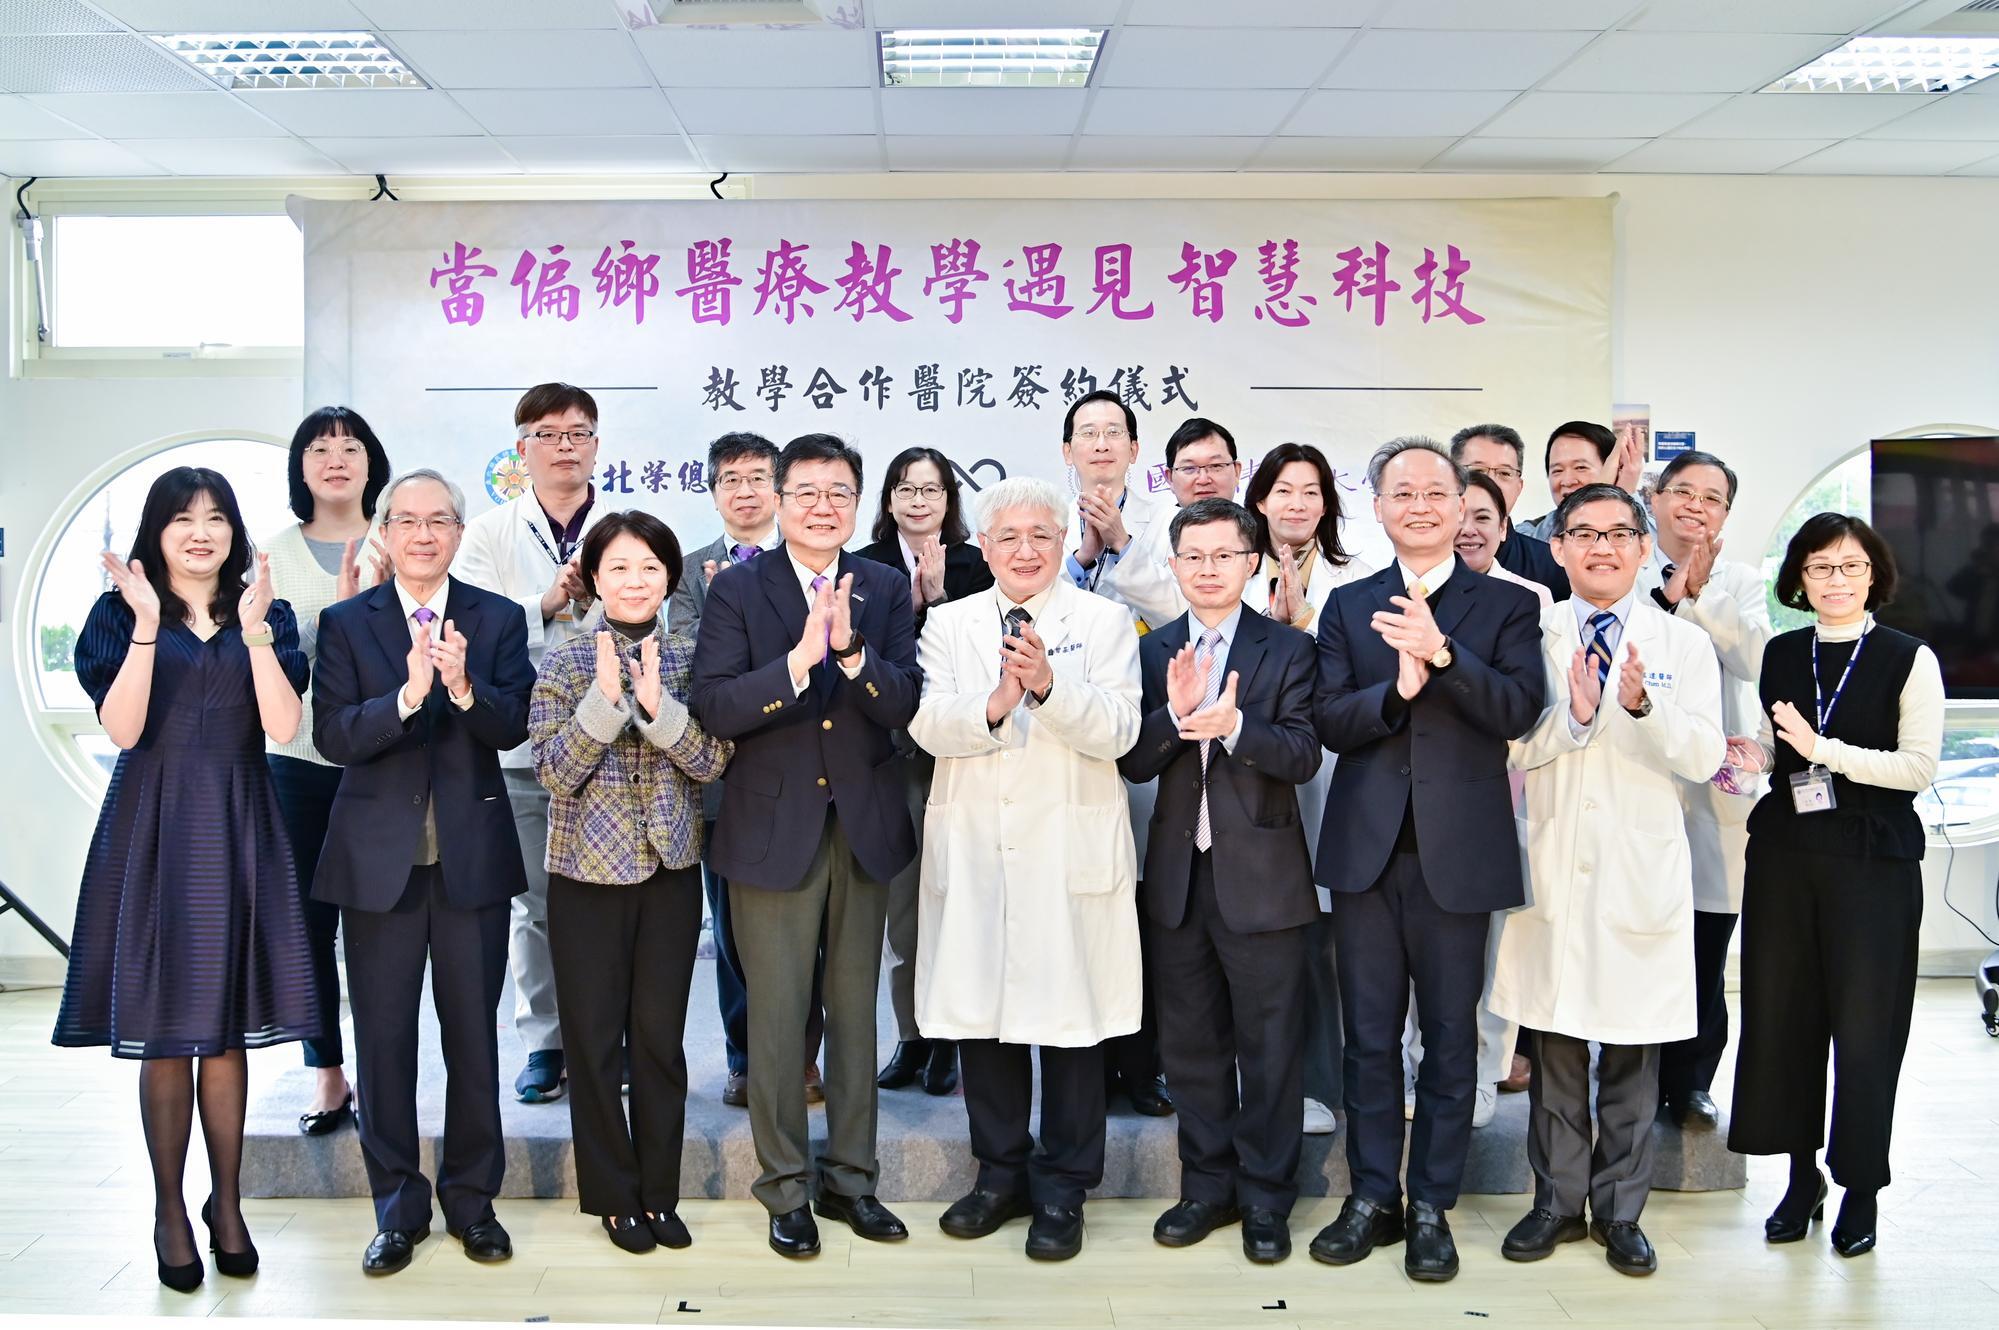 NTHU has recently entered into a cooperative arrangement with the Hsinchu Branch of the TVGH for providing practicums for students in the PPM.